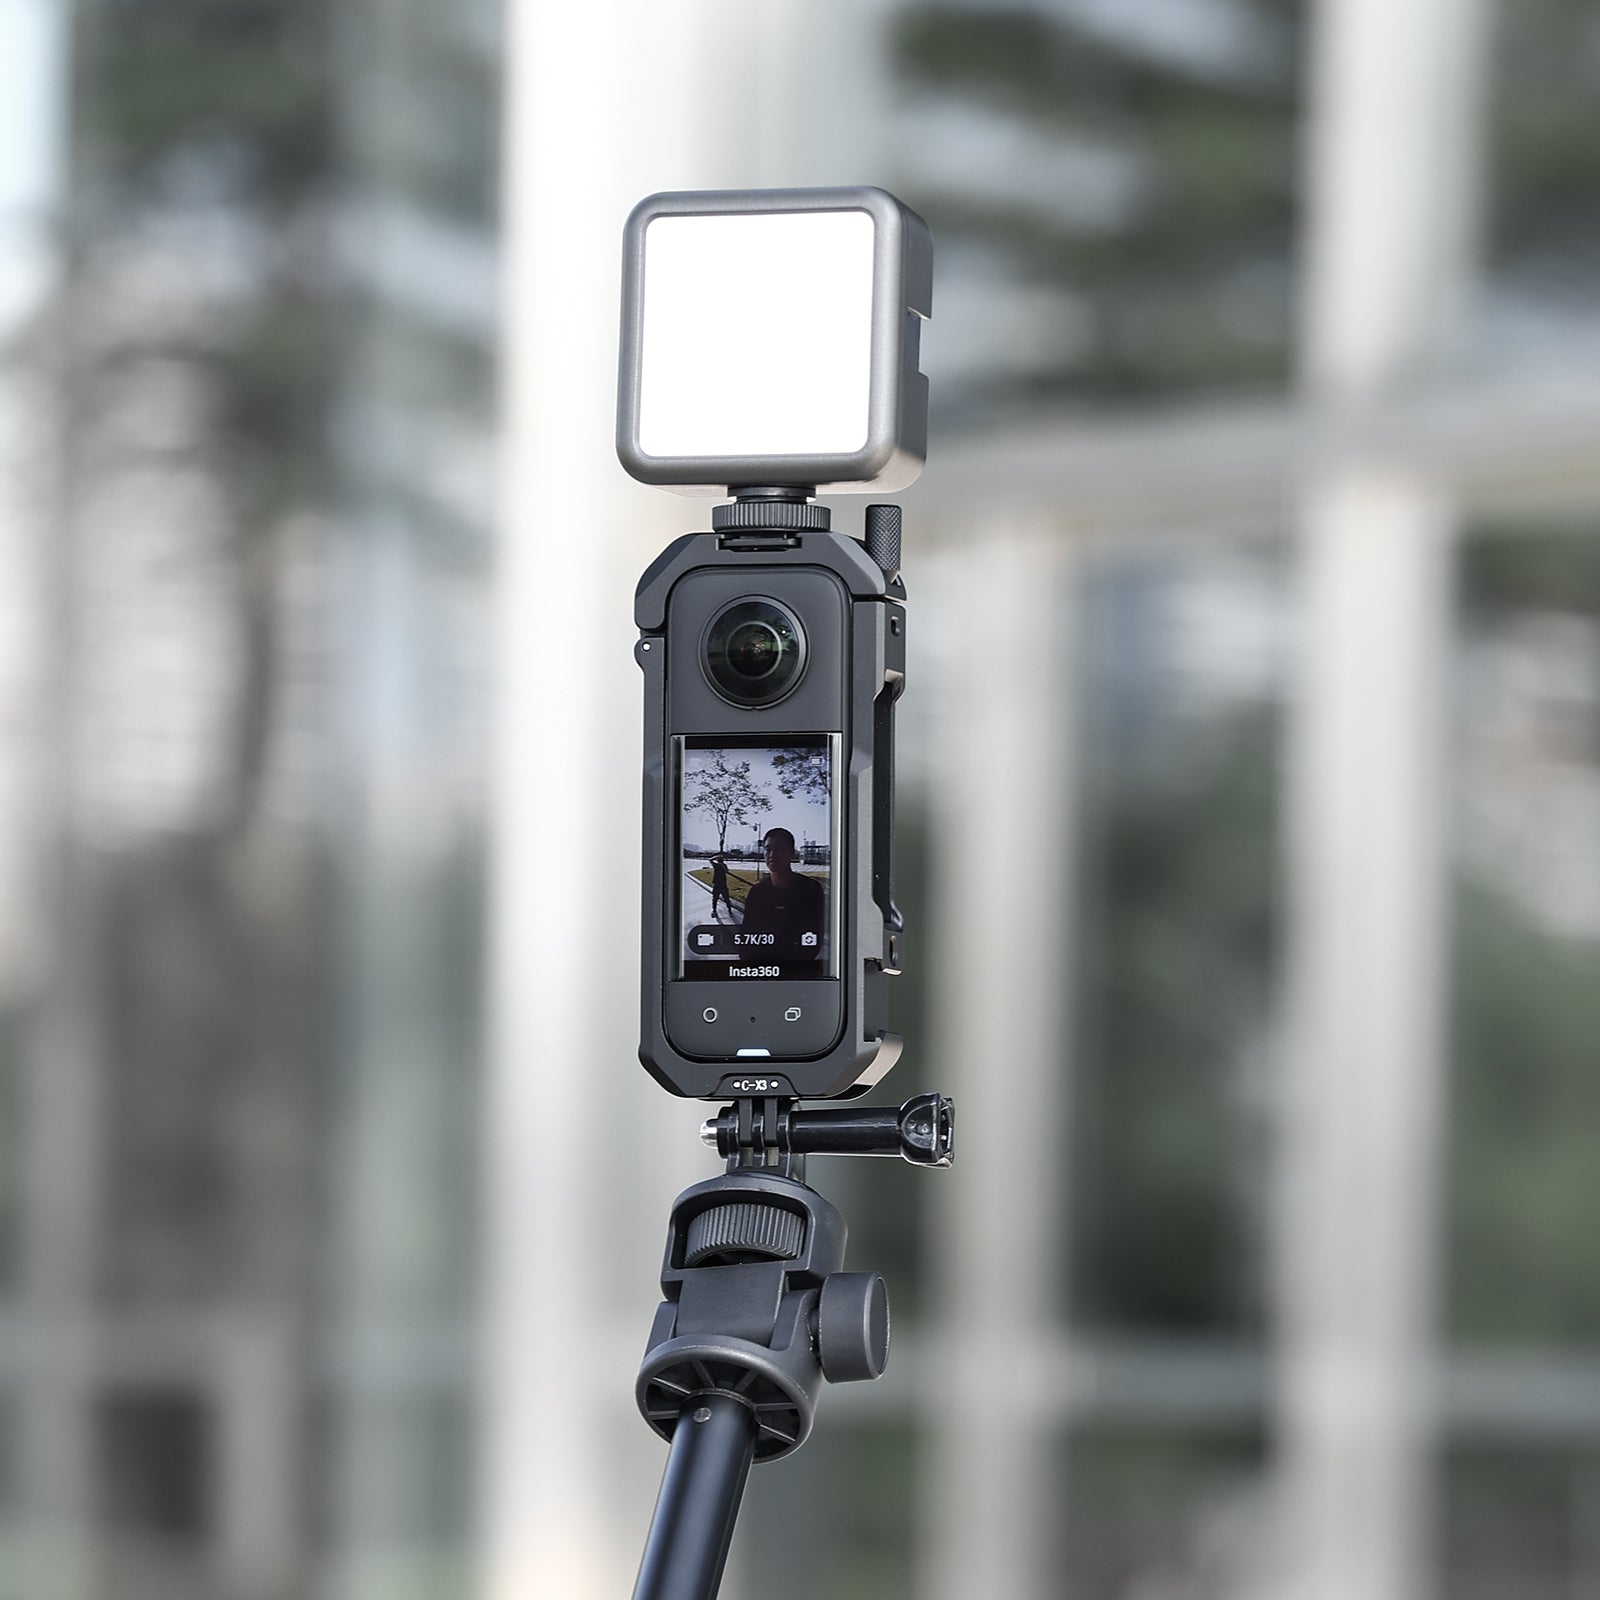 Ulanzi Cage for Insta360 One X3